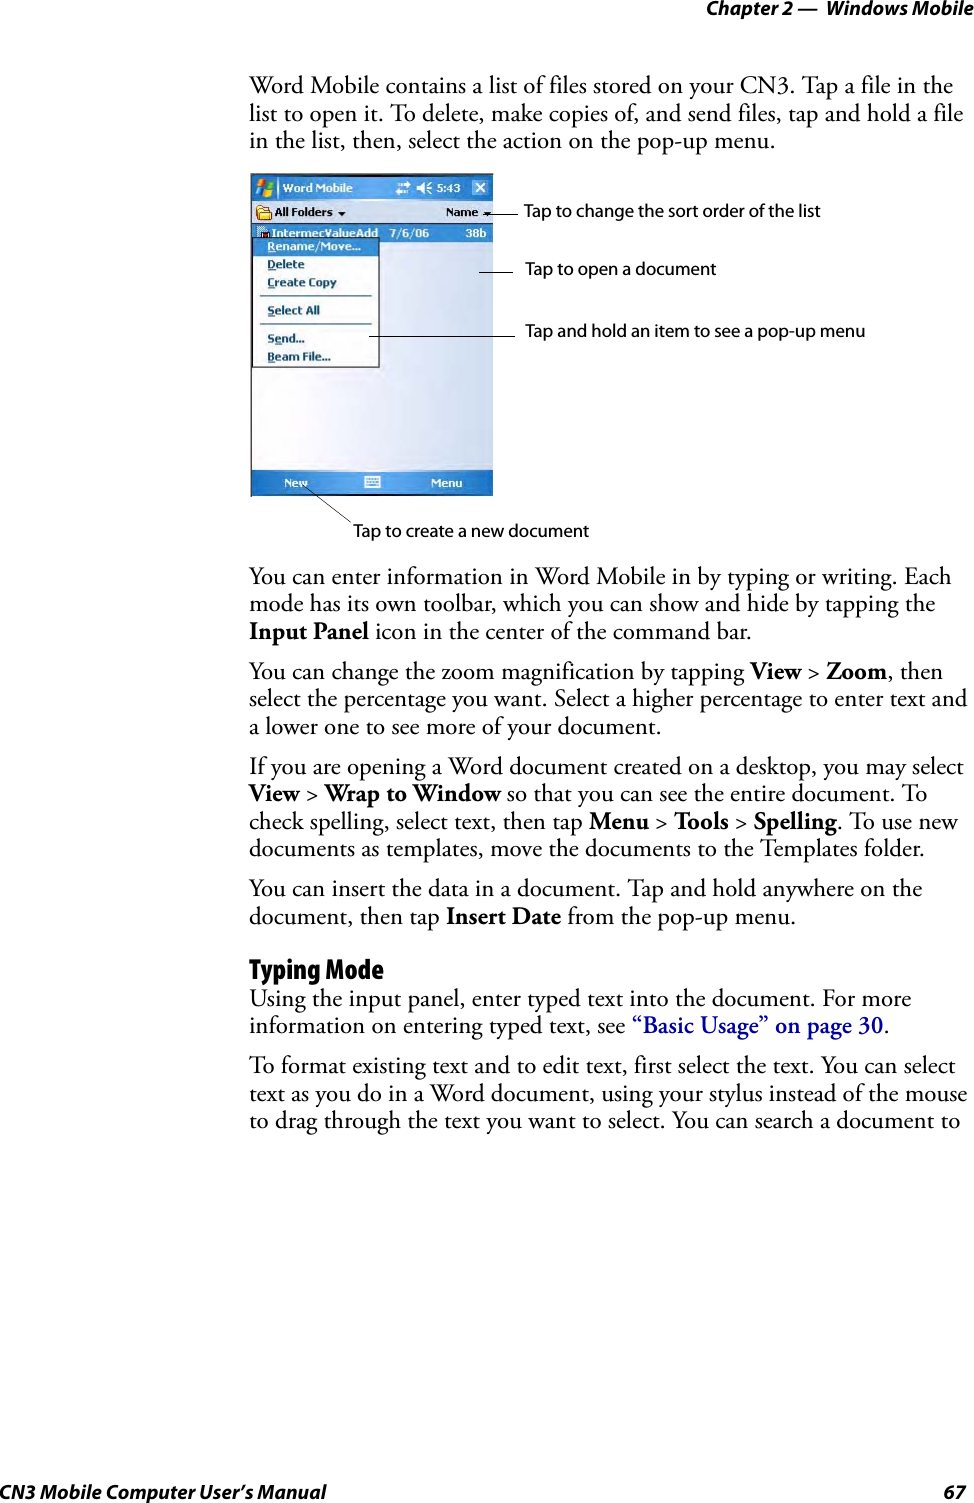 Chapter 2 —  Windows MobileCN3 Mobile Computer User’s Manual 67Word Mobile contains a list of files stored on your CN3. Tap a file in the list to open it. To delete, make copies of, and send files, tap and hold a file in the list, then, select the action on the pop-up menu.You can enter information in Word Mobile in by typing or writing. Each mode has its own toolbar, which you can show and hide by tapping the Input Panel icon in the center of the command bar.You can change the zoom magnification by tapping View &gt; Zoom, then select the percentage you want. Select a higher percentage to enter text and a lower one to see more of your document.If you are opening a Word document created on a desktop, you may select View &gt; Wrap to Window so that you can see the entire document. To check spelling, select text, then tap Menu &gt; To o ls  &gt; Spelling. To use new documents as templates, move the documents to the Templates folder. You can insert the data in a document. Tap and hold anywhere on the document, then tap Insert Date from the pop-up menu.Typing ModeUsing the input panel, enter typed text into the document. For more information on entering typed text, see “Basic Usage” on page 30.To format existing text and to edit text, first select the text. You can select text as you do in a Word document, using your stylus instead of the mouse to drag through the text you want to select. You can search a document to Tap to change the sort order of the listTap to open a documentTap and hold an item to see a pop-up menuTap to create a new document